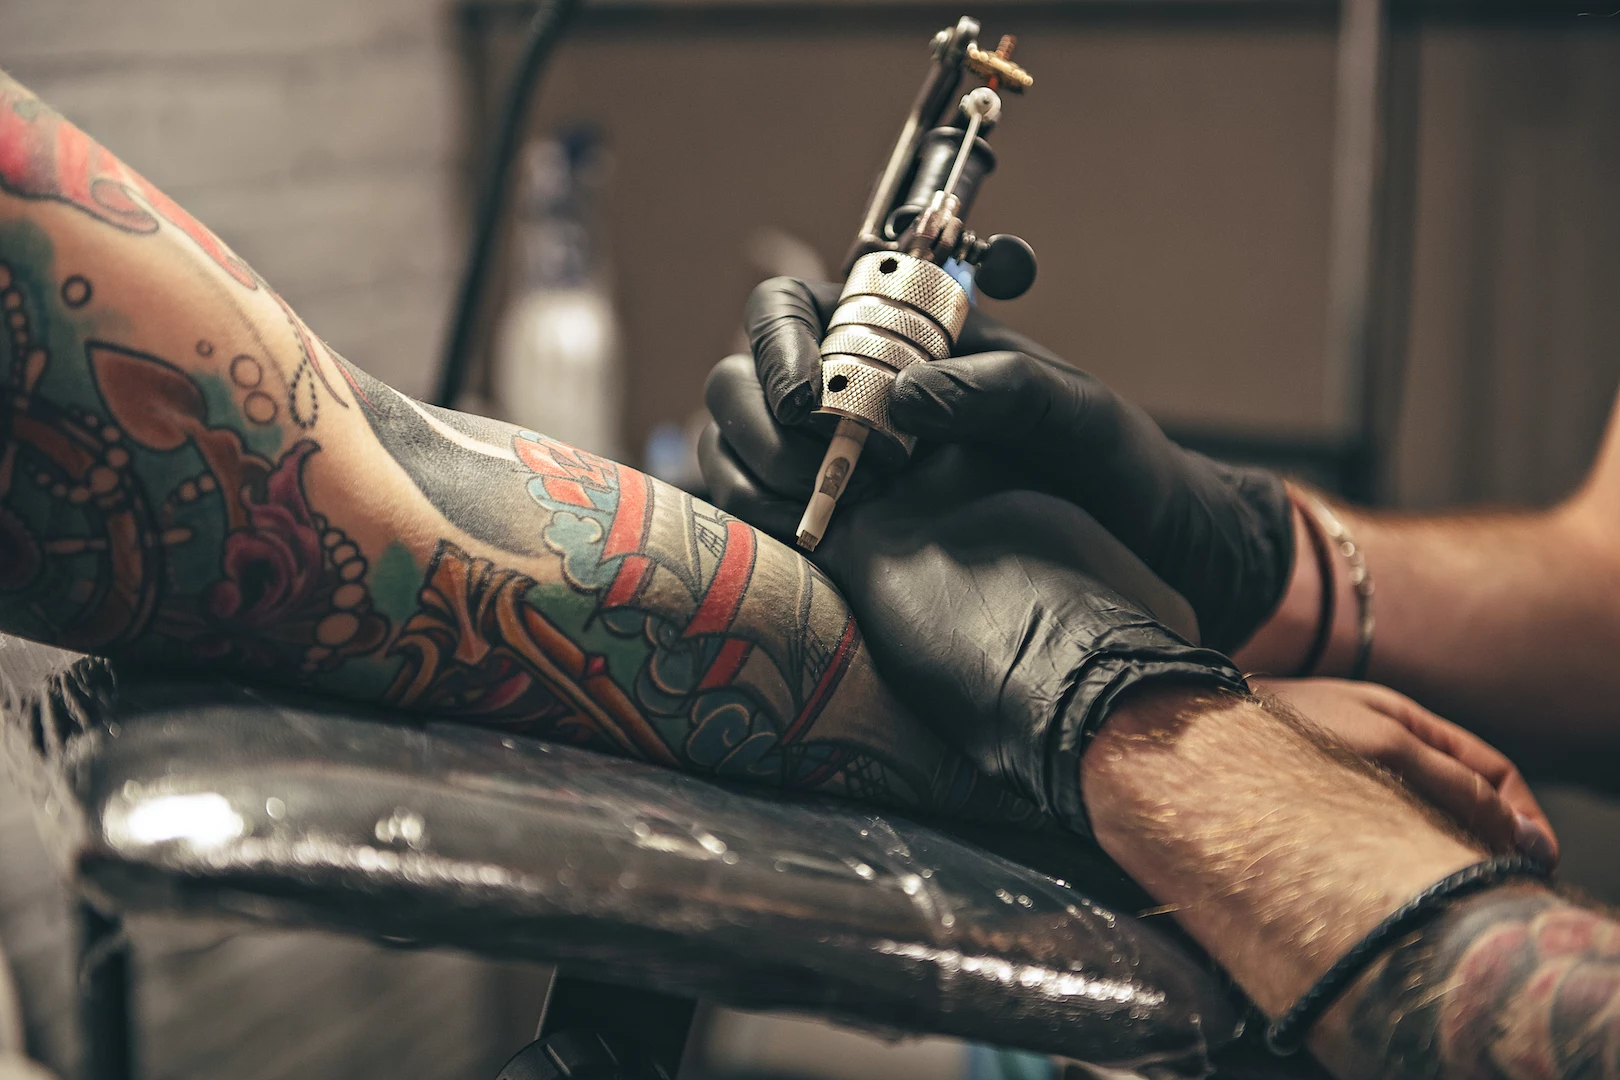 High-tech tattoo startup in Austin launches automated device | KXAN Austin